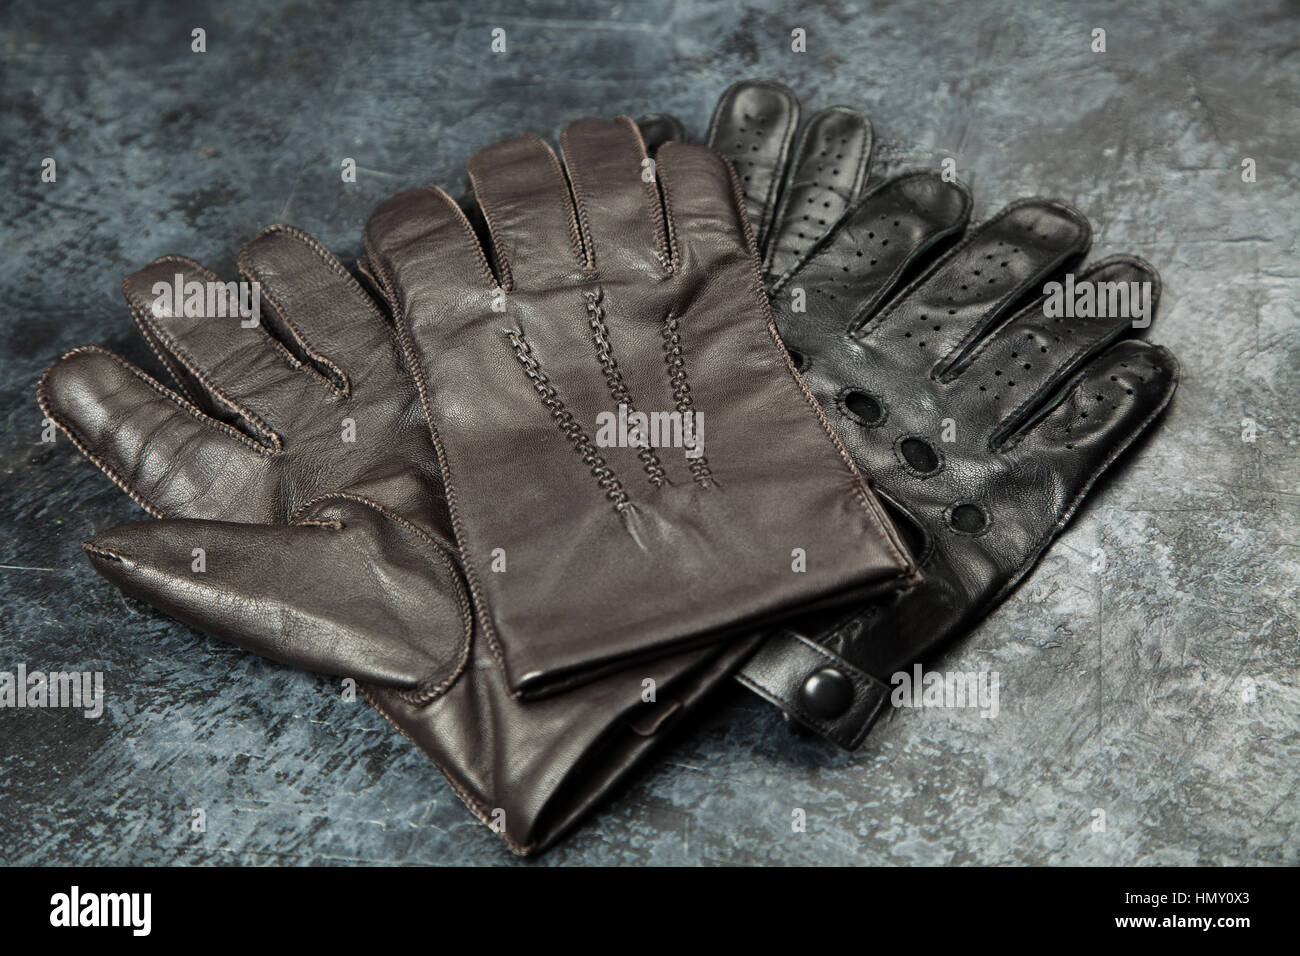 Two pairs of leather gloves Stock Photo